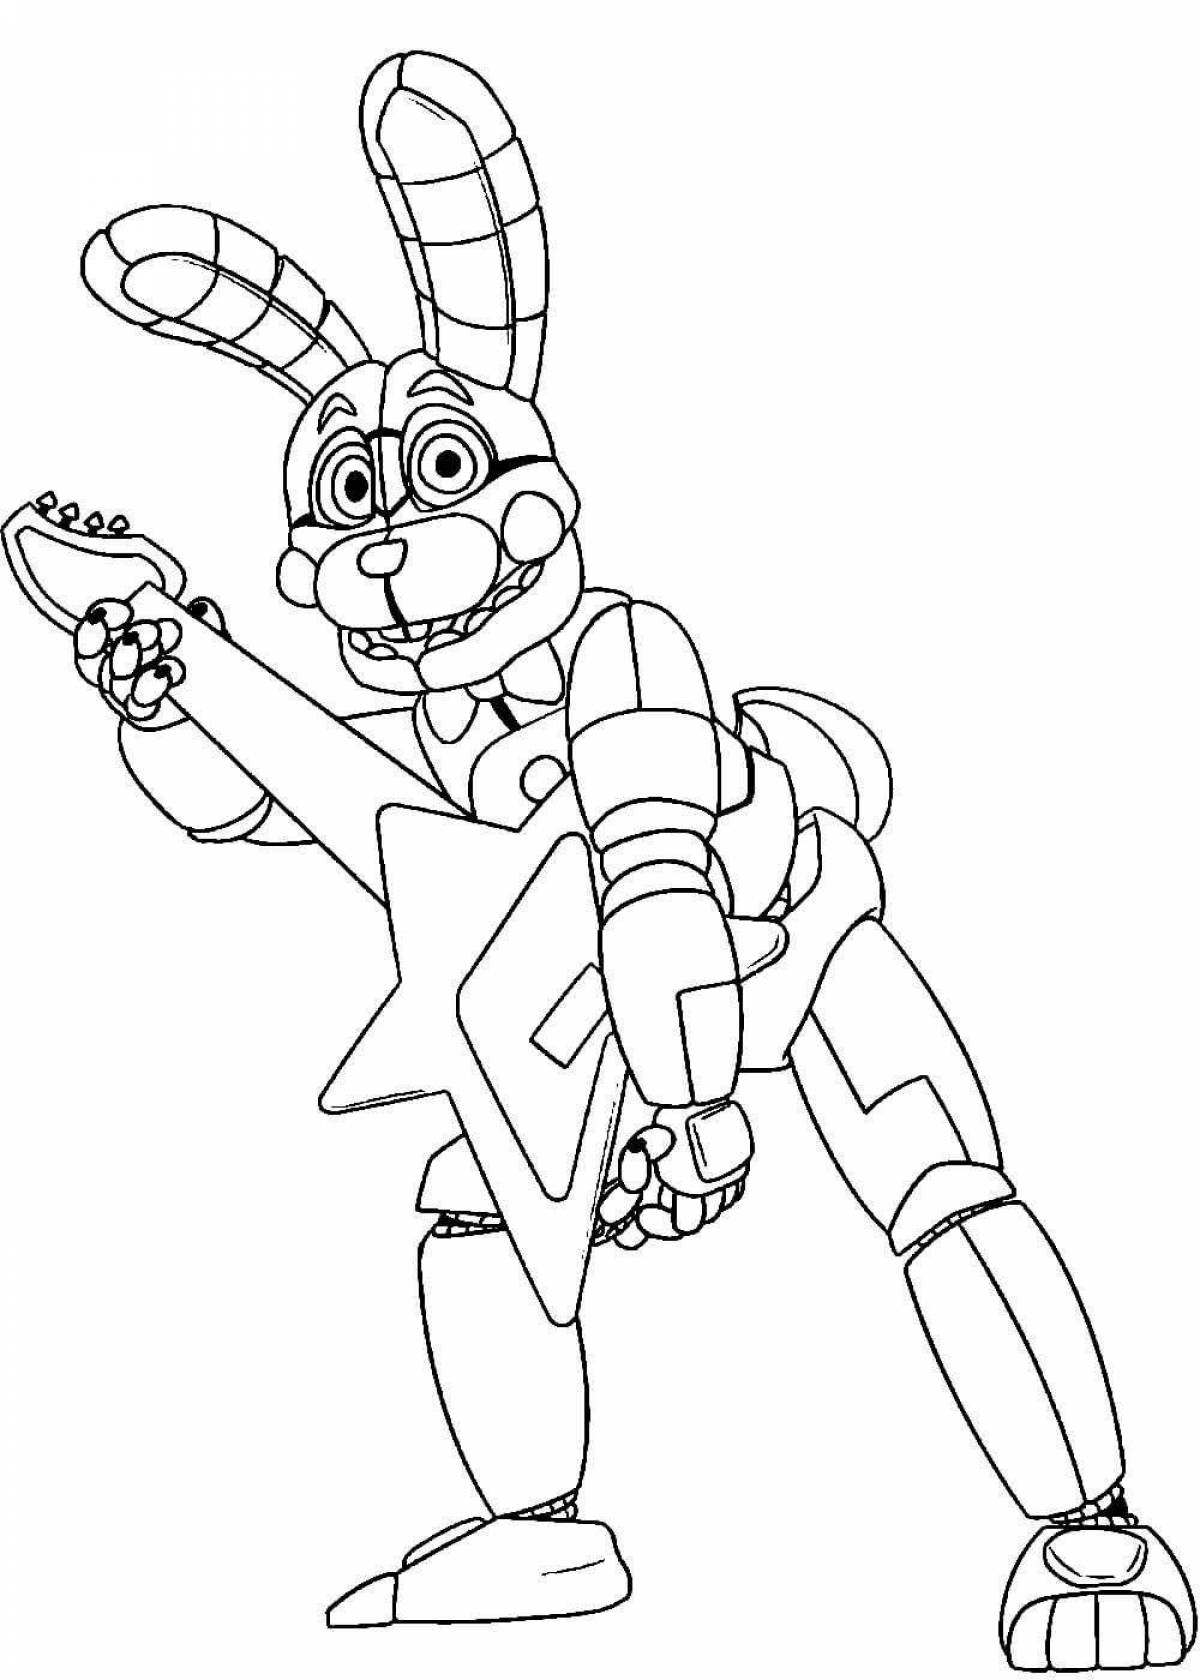 Coloring bright bonnie from fnaf 1